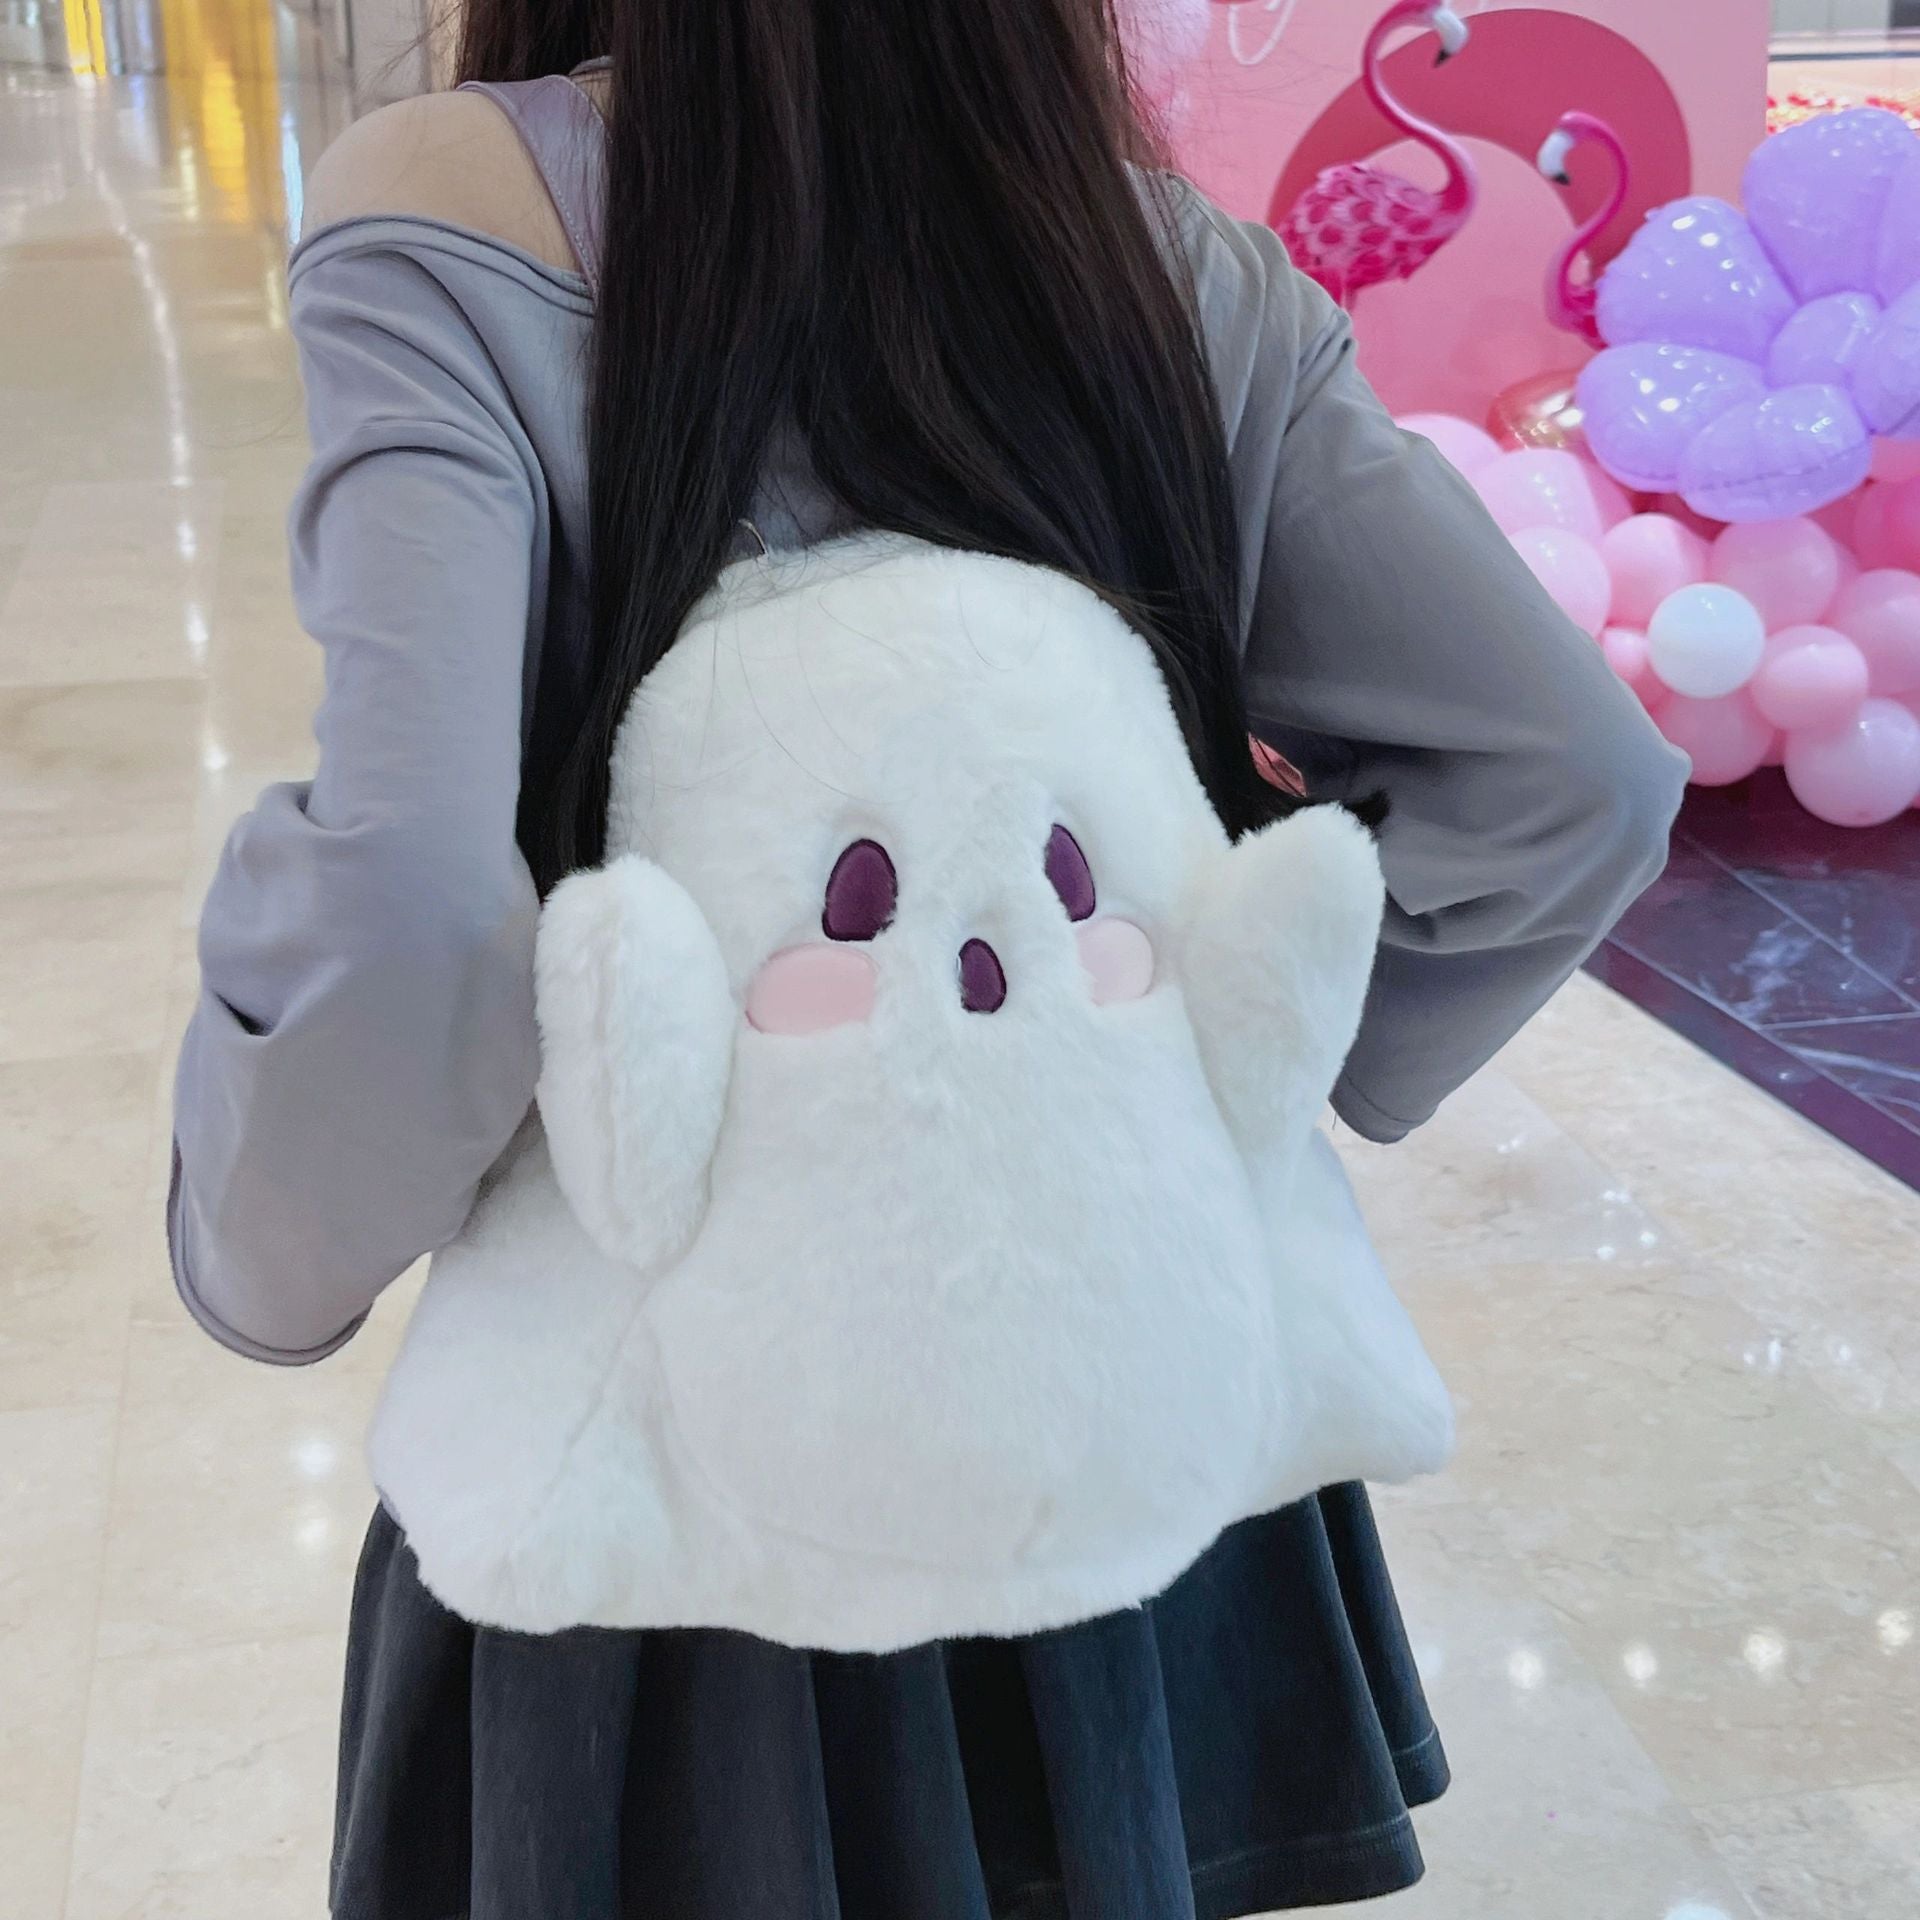 Halloween Cute Ghost Cartoon Backpack Personality Doll - MentorG Store